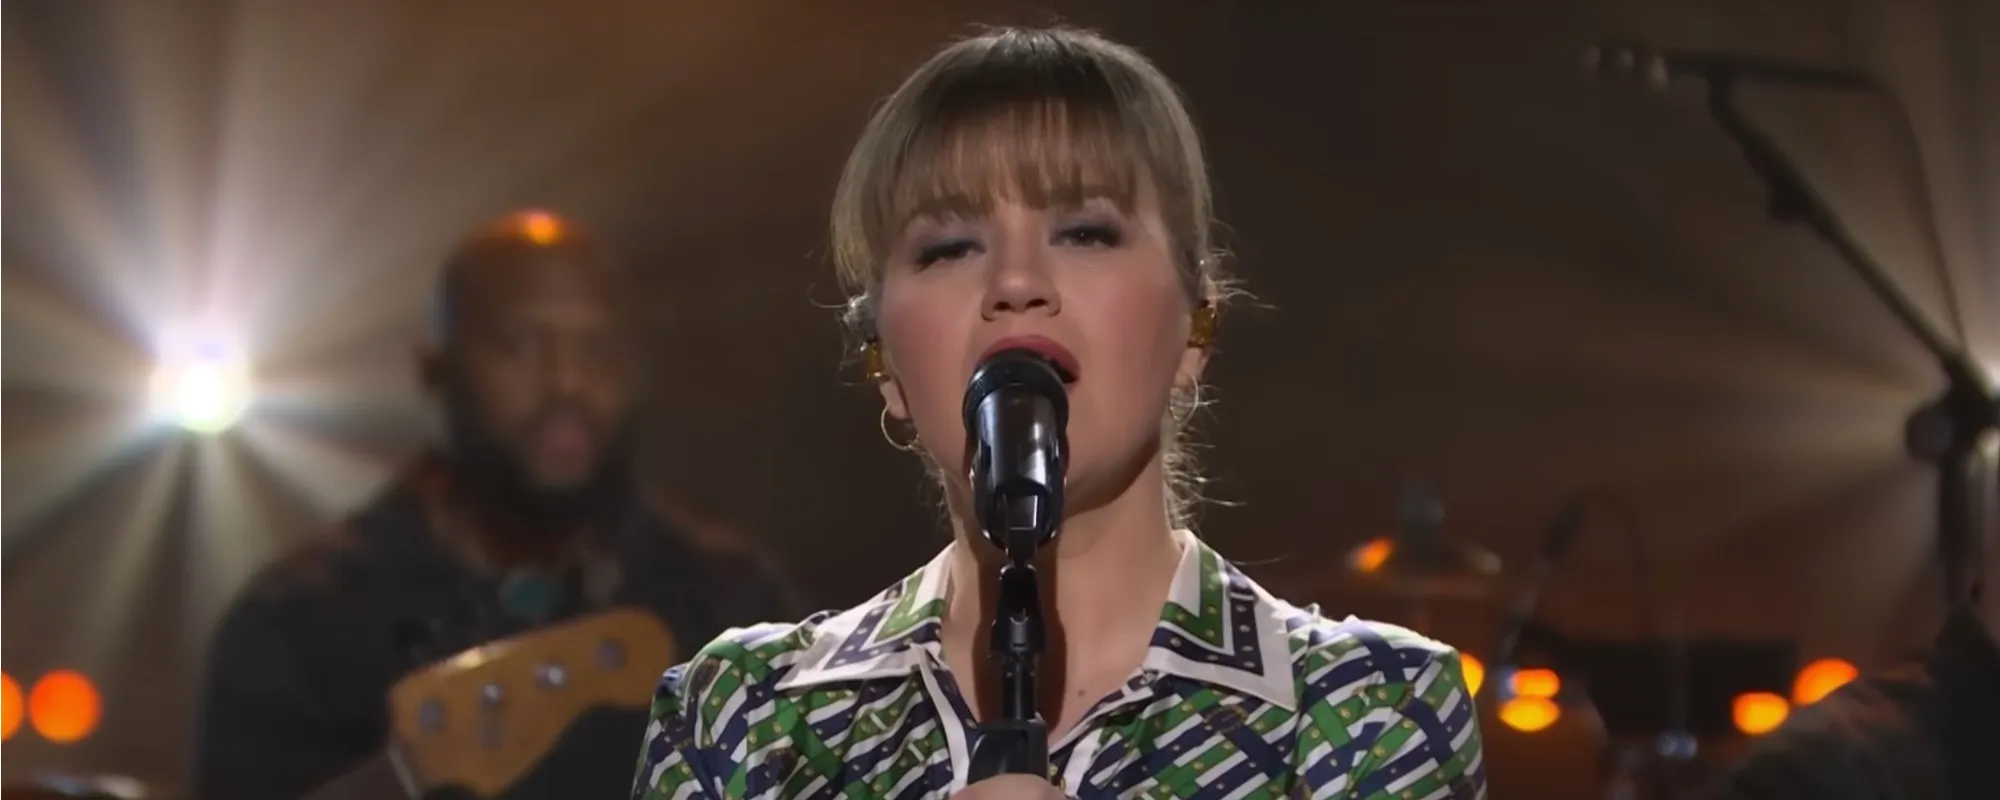 Kelly Clarkson Gives Moving Cover of “When You Say Nothing at All” by Keith Whitley